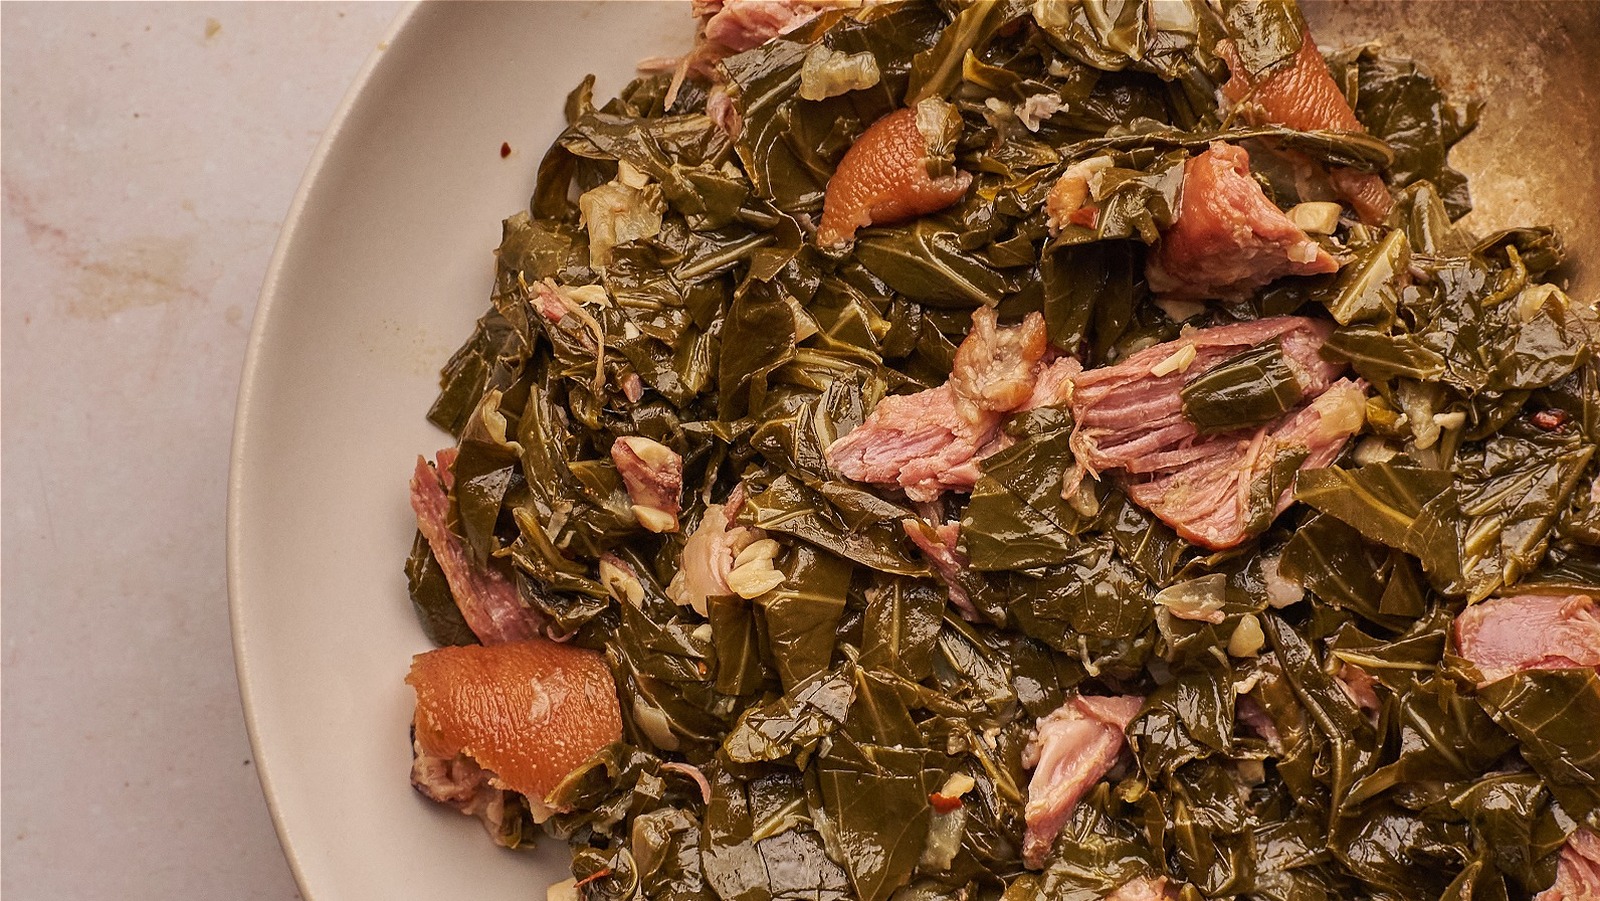 cooked collard greens nutrition